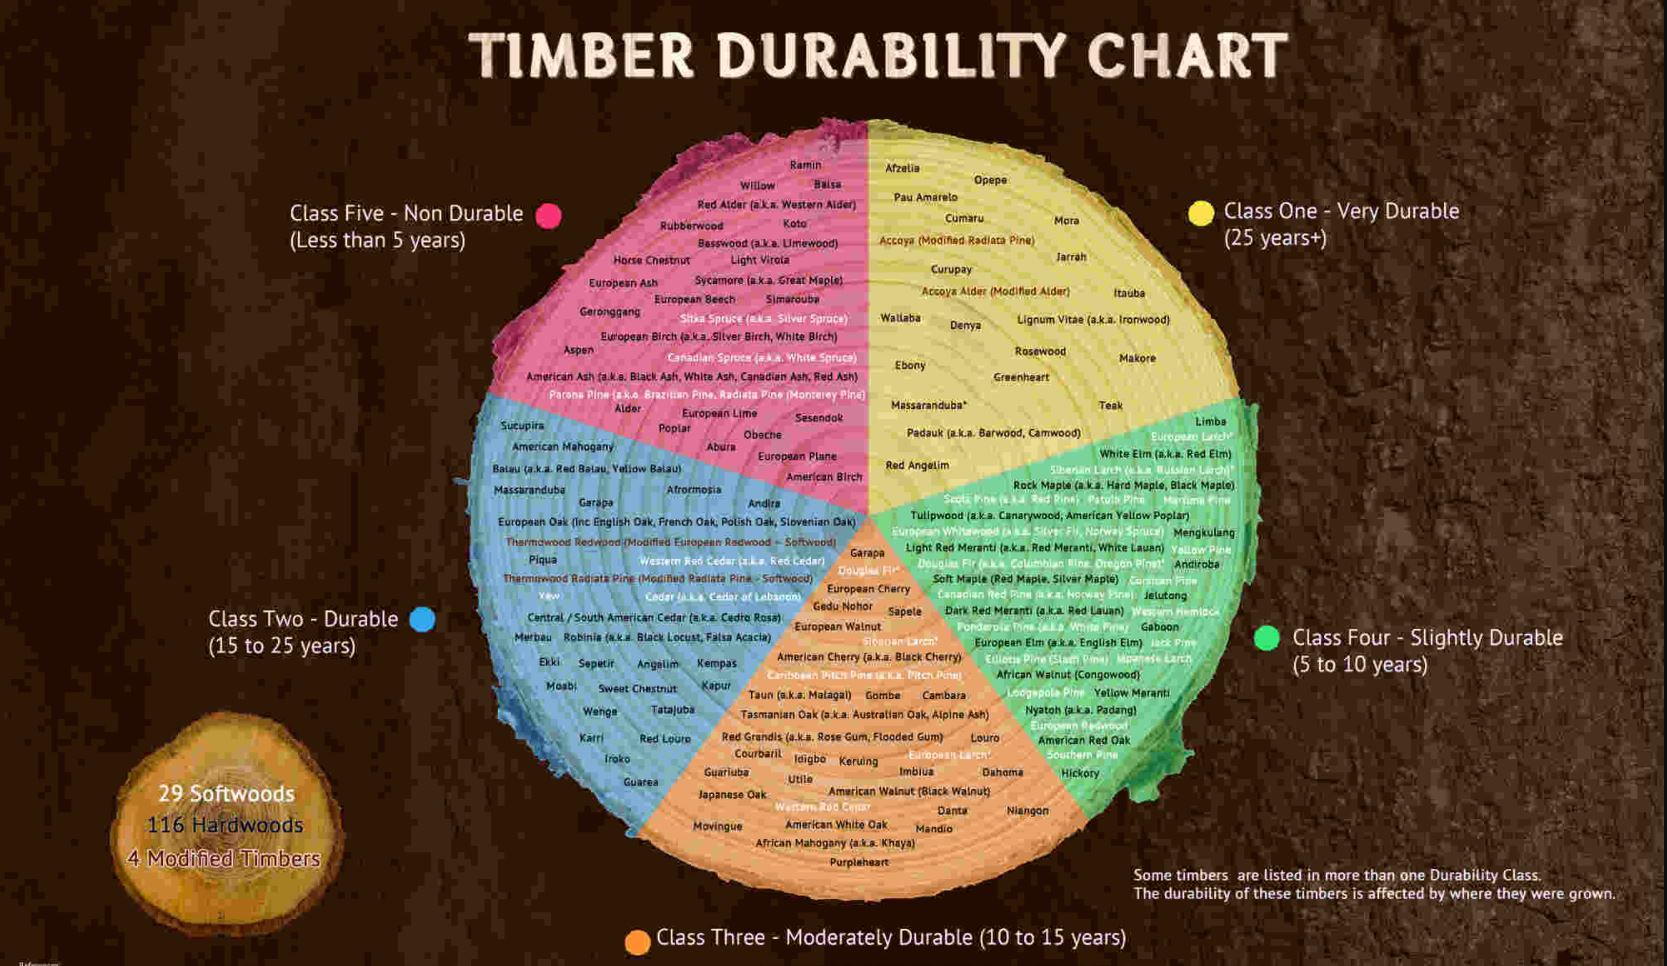 Timber Durability Chart showing how long timber lasts and highlighting timber that is good for window construction